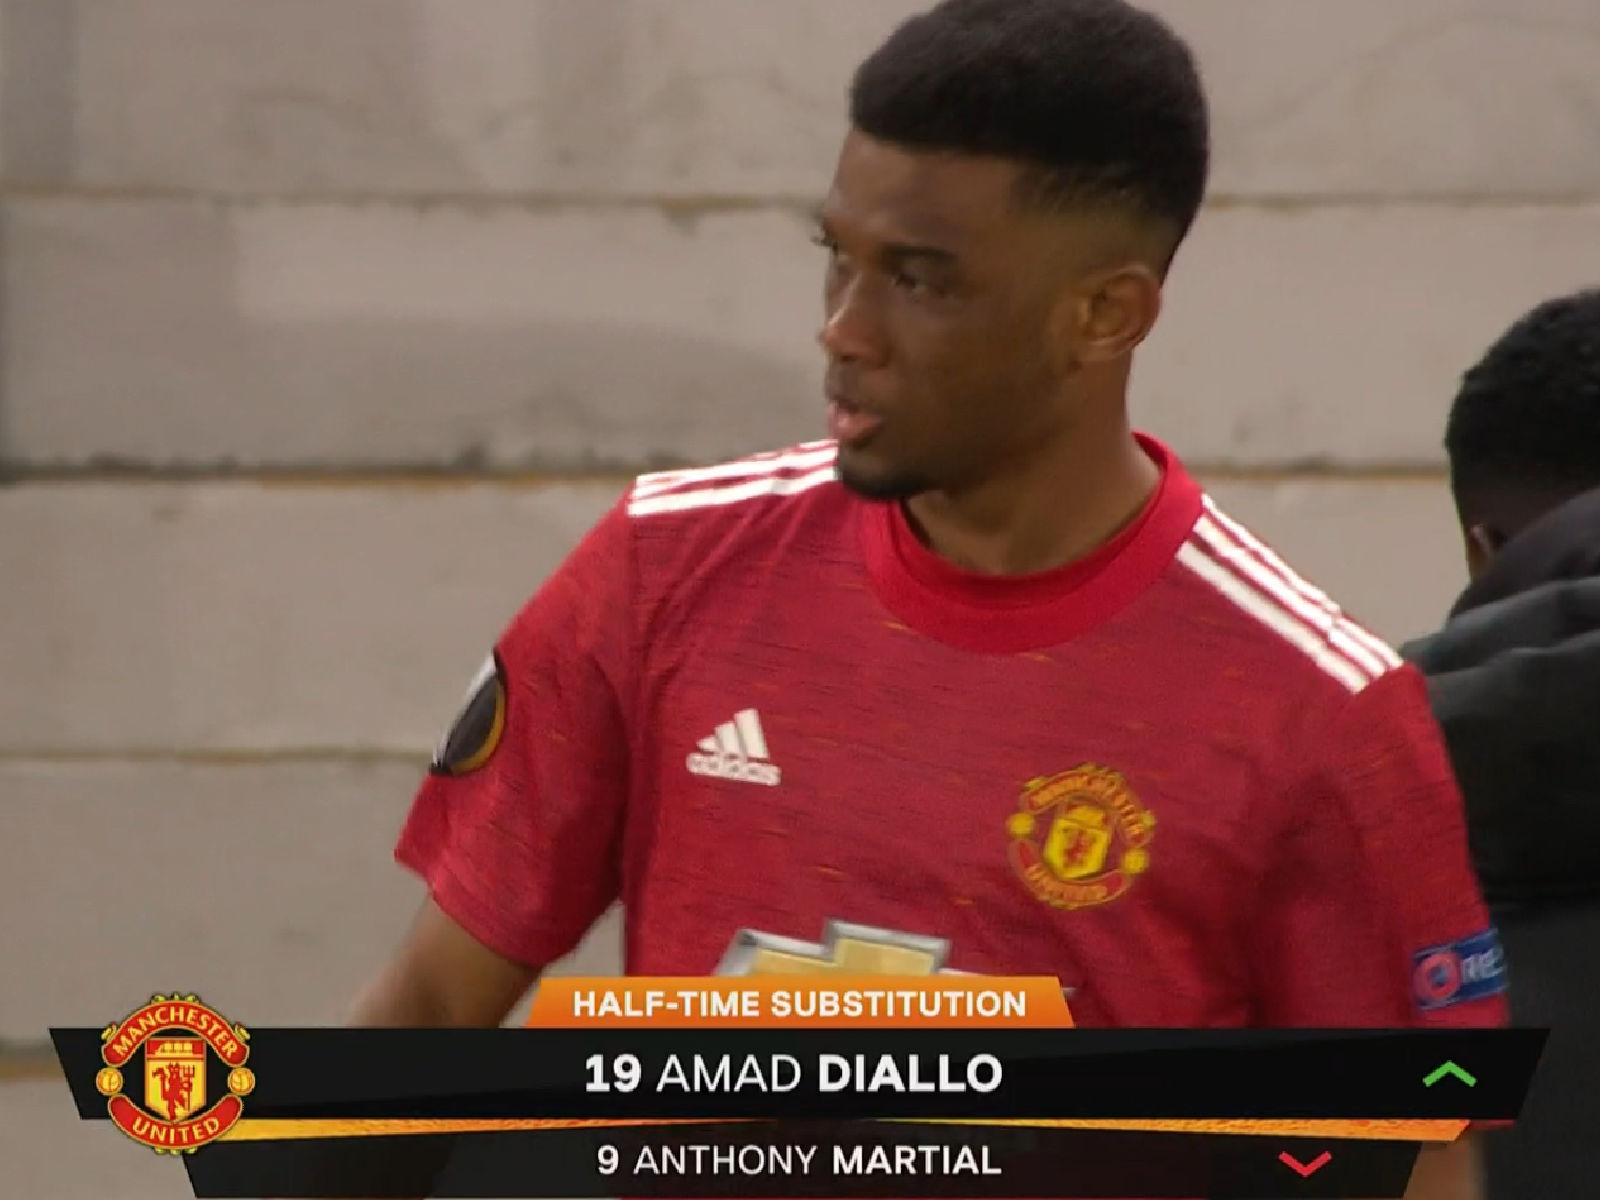 Twitter floored as Amad Diallo scores stunning first goal for Manchester United